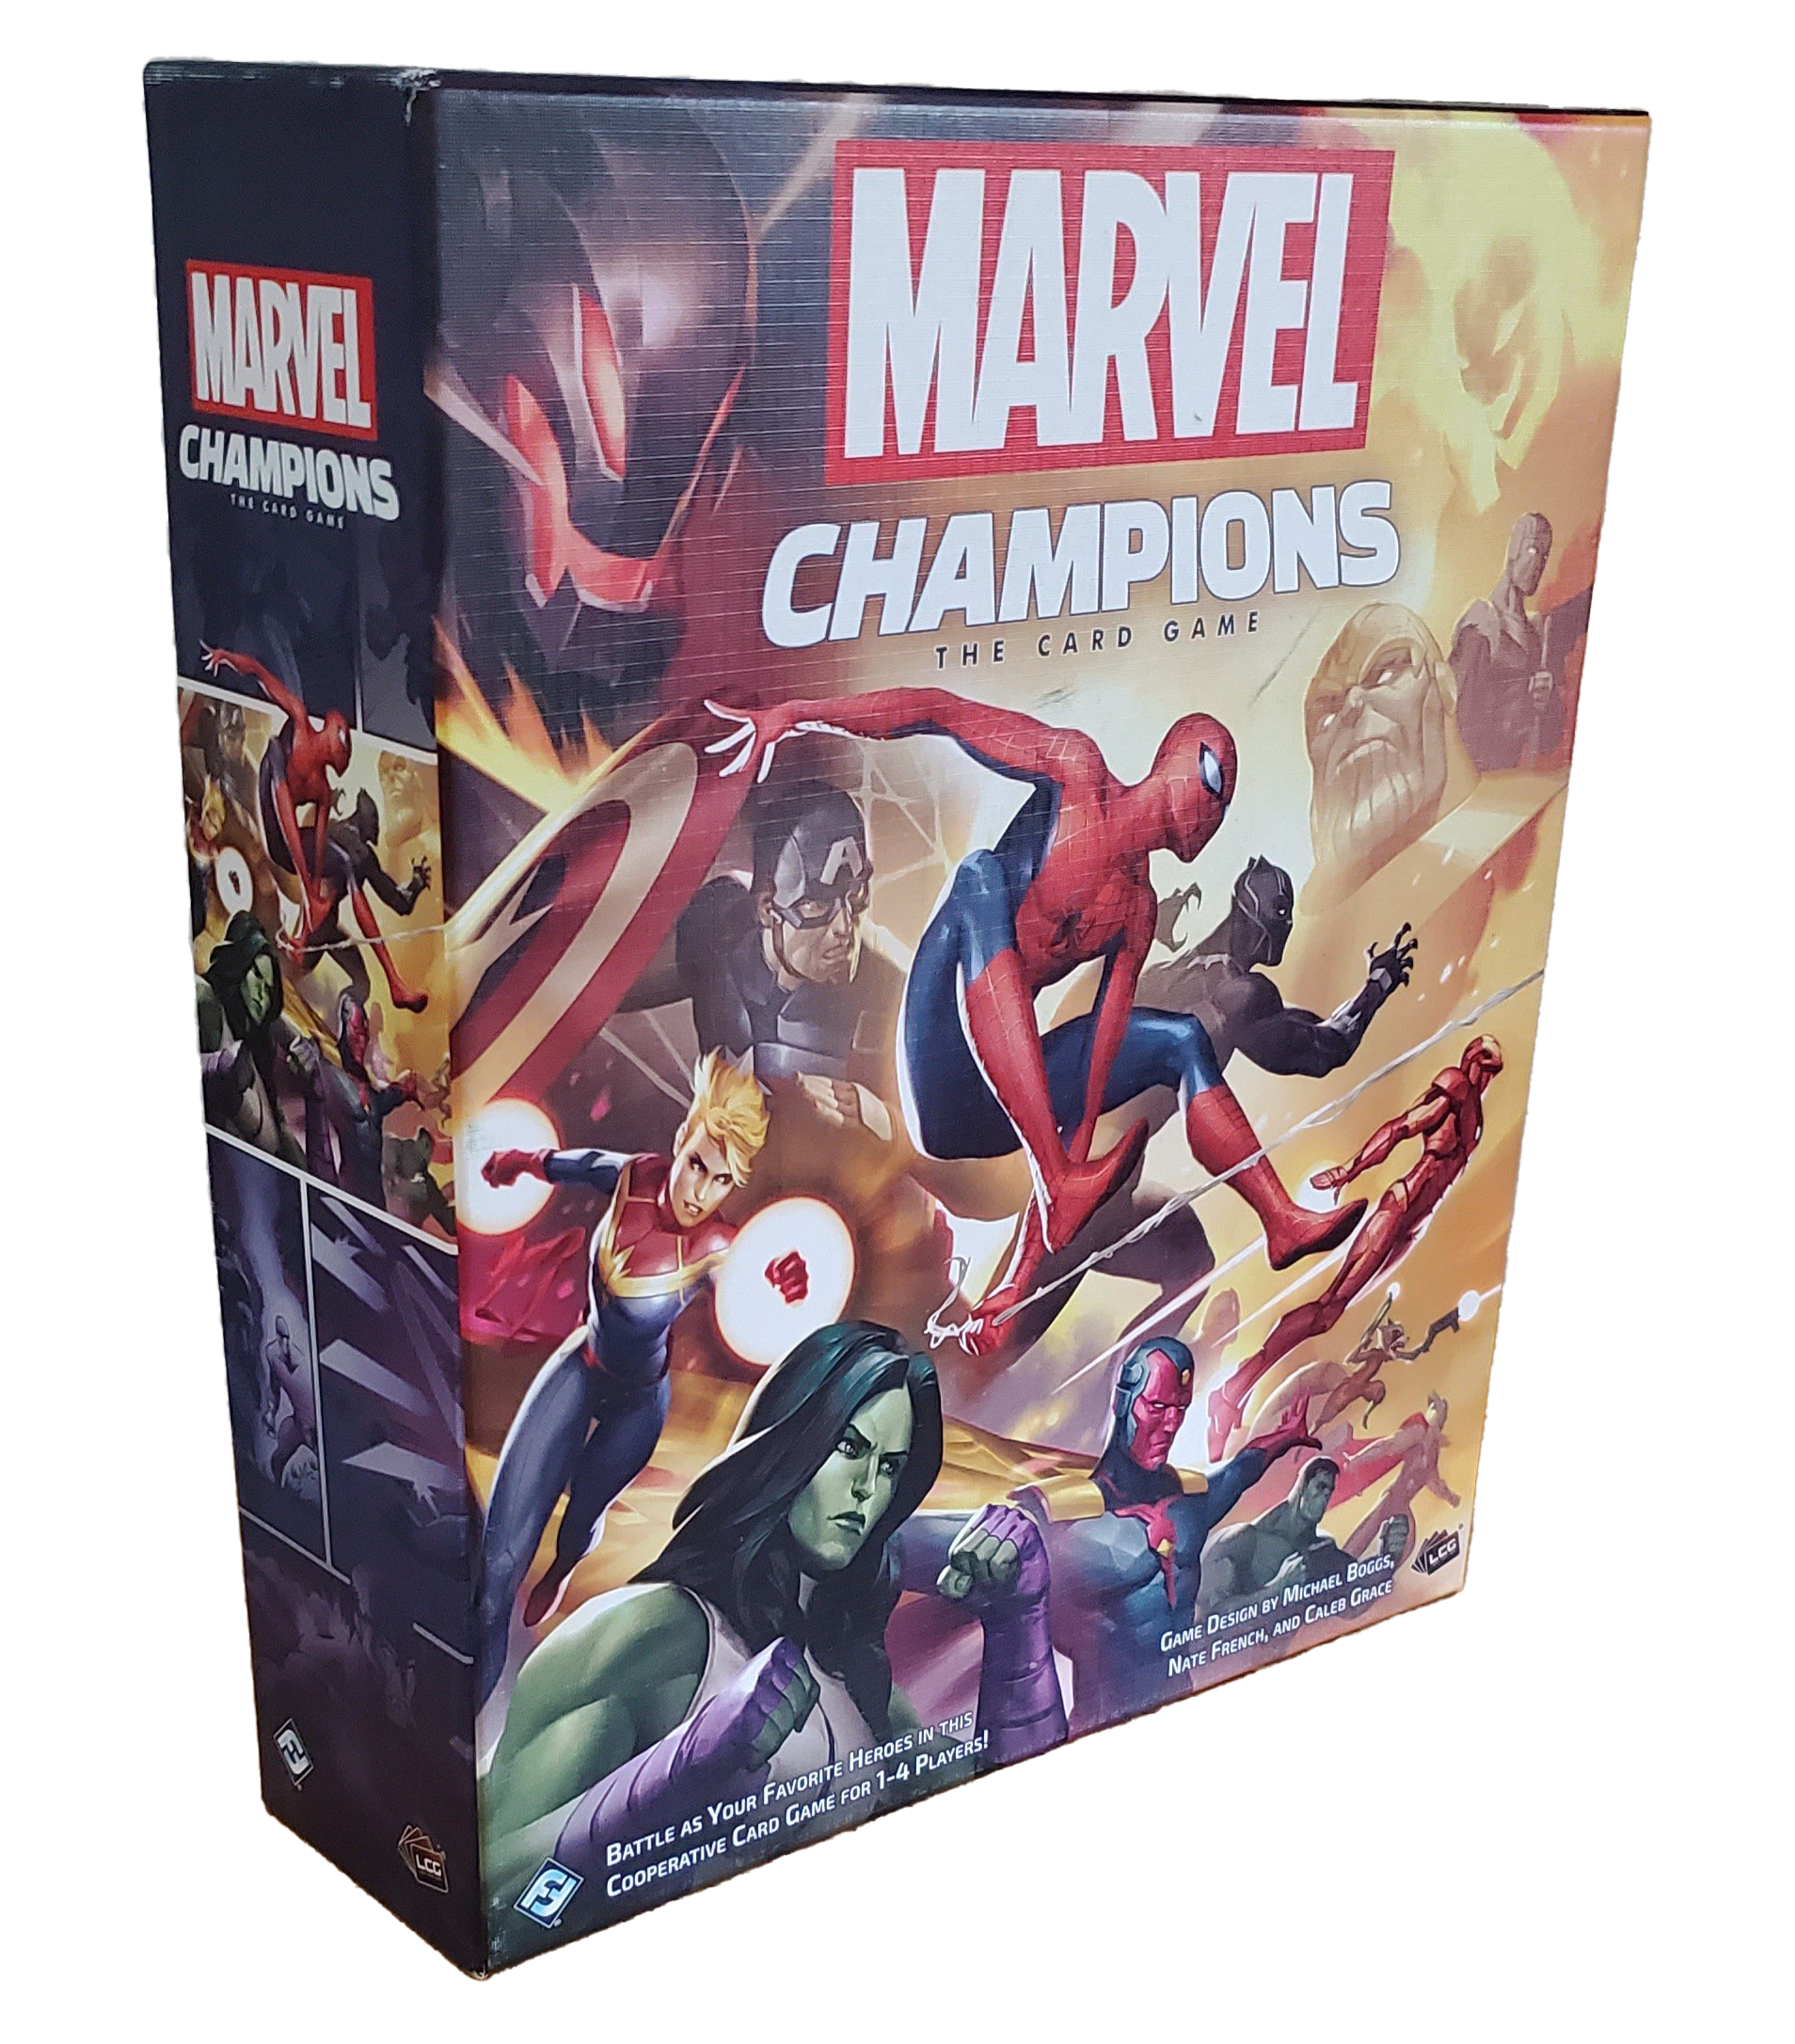 Marvel Champions board game by Asmodee